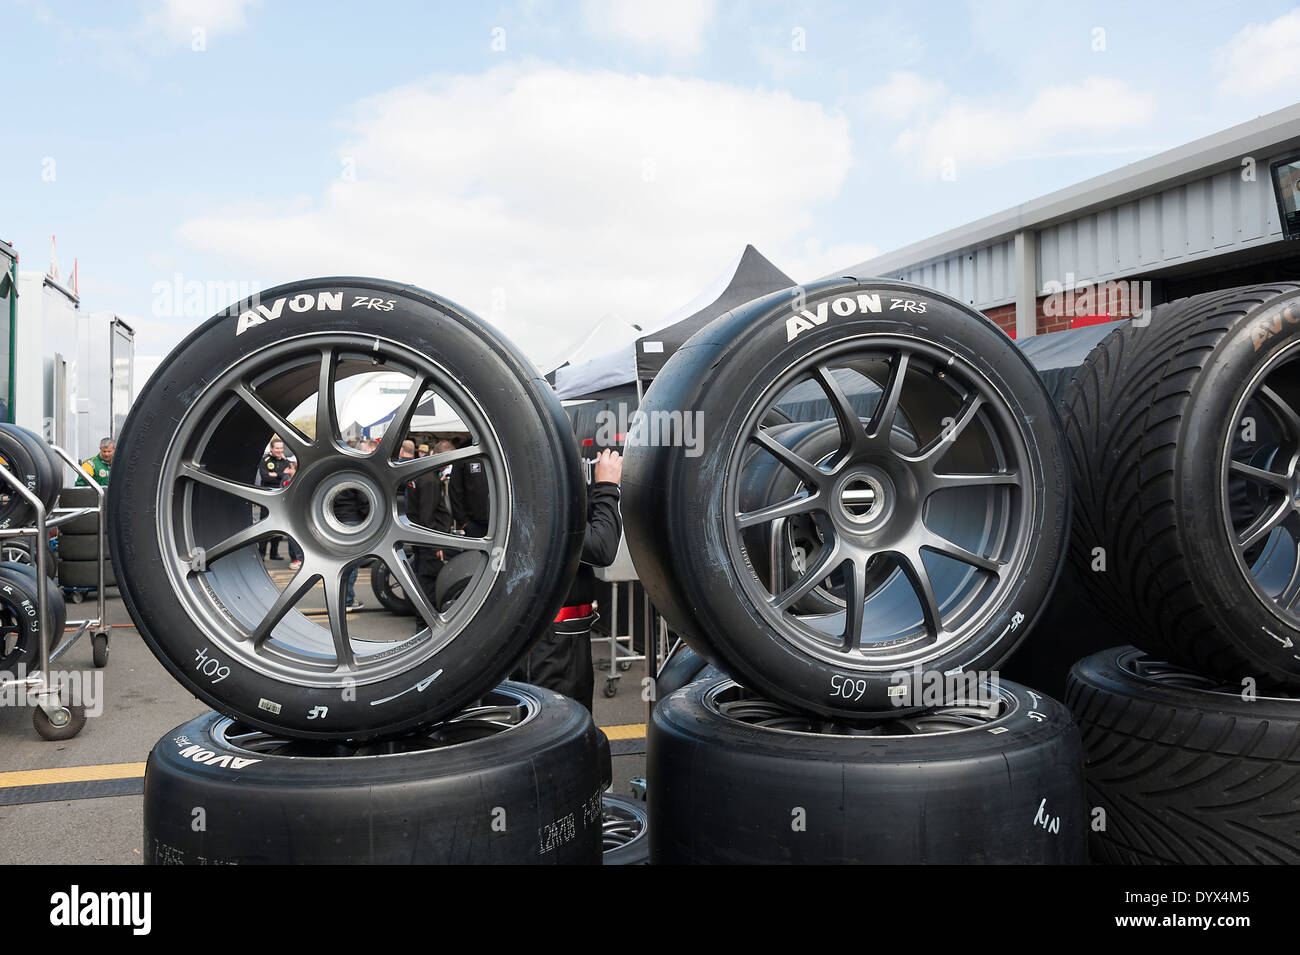 Slick and Wet Tyres on Wheels for GT Racing Cars in the Paddock at Oulton Park Motor Racing Circuit Cheshire England UK Stock Photo